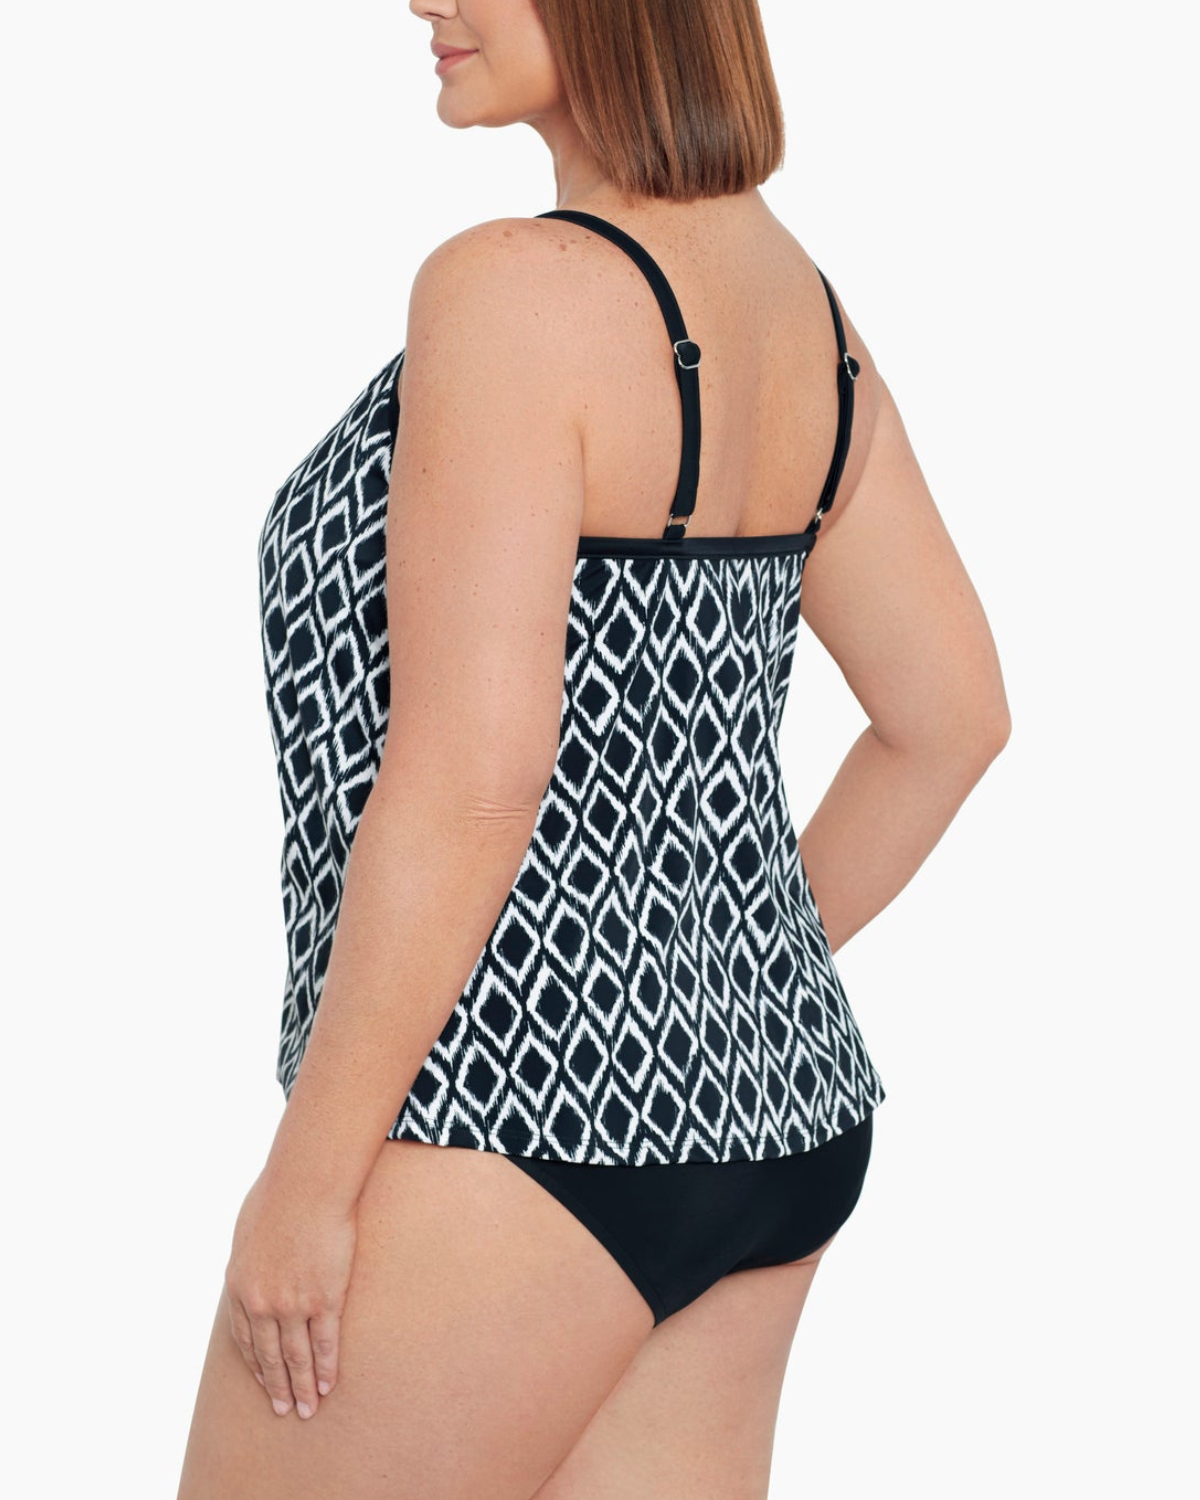 Model wearing a plus size flyaway tankini top in a black and ivory ikat print